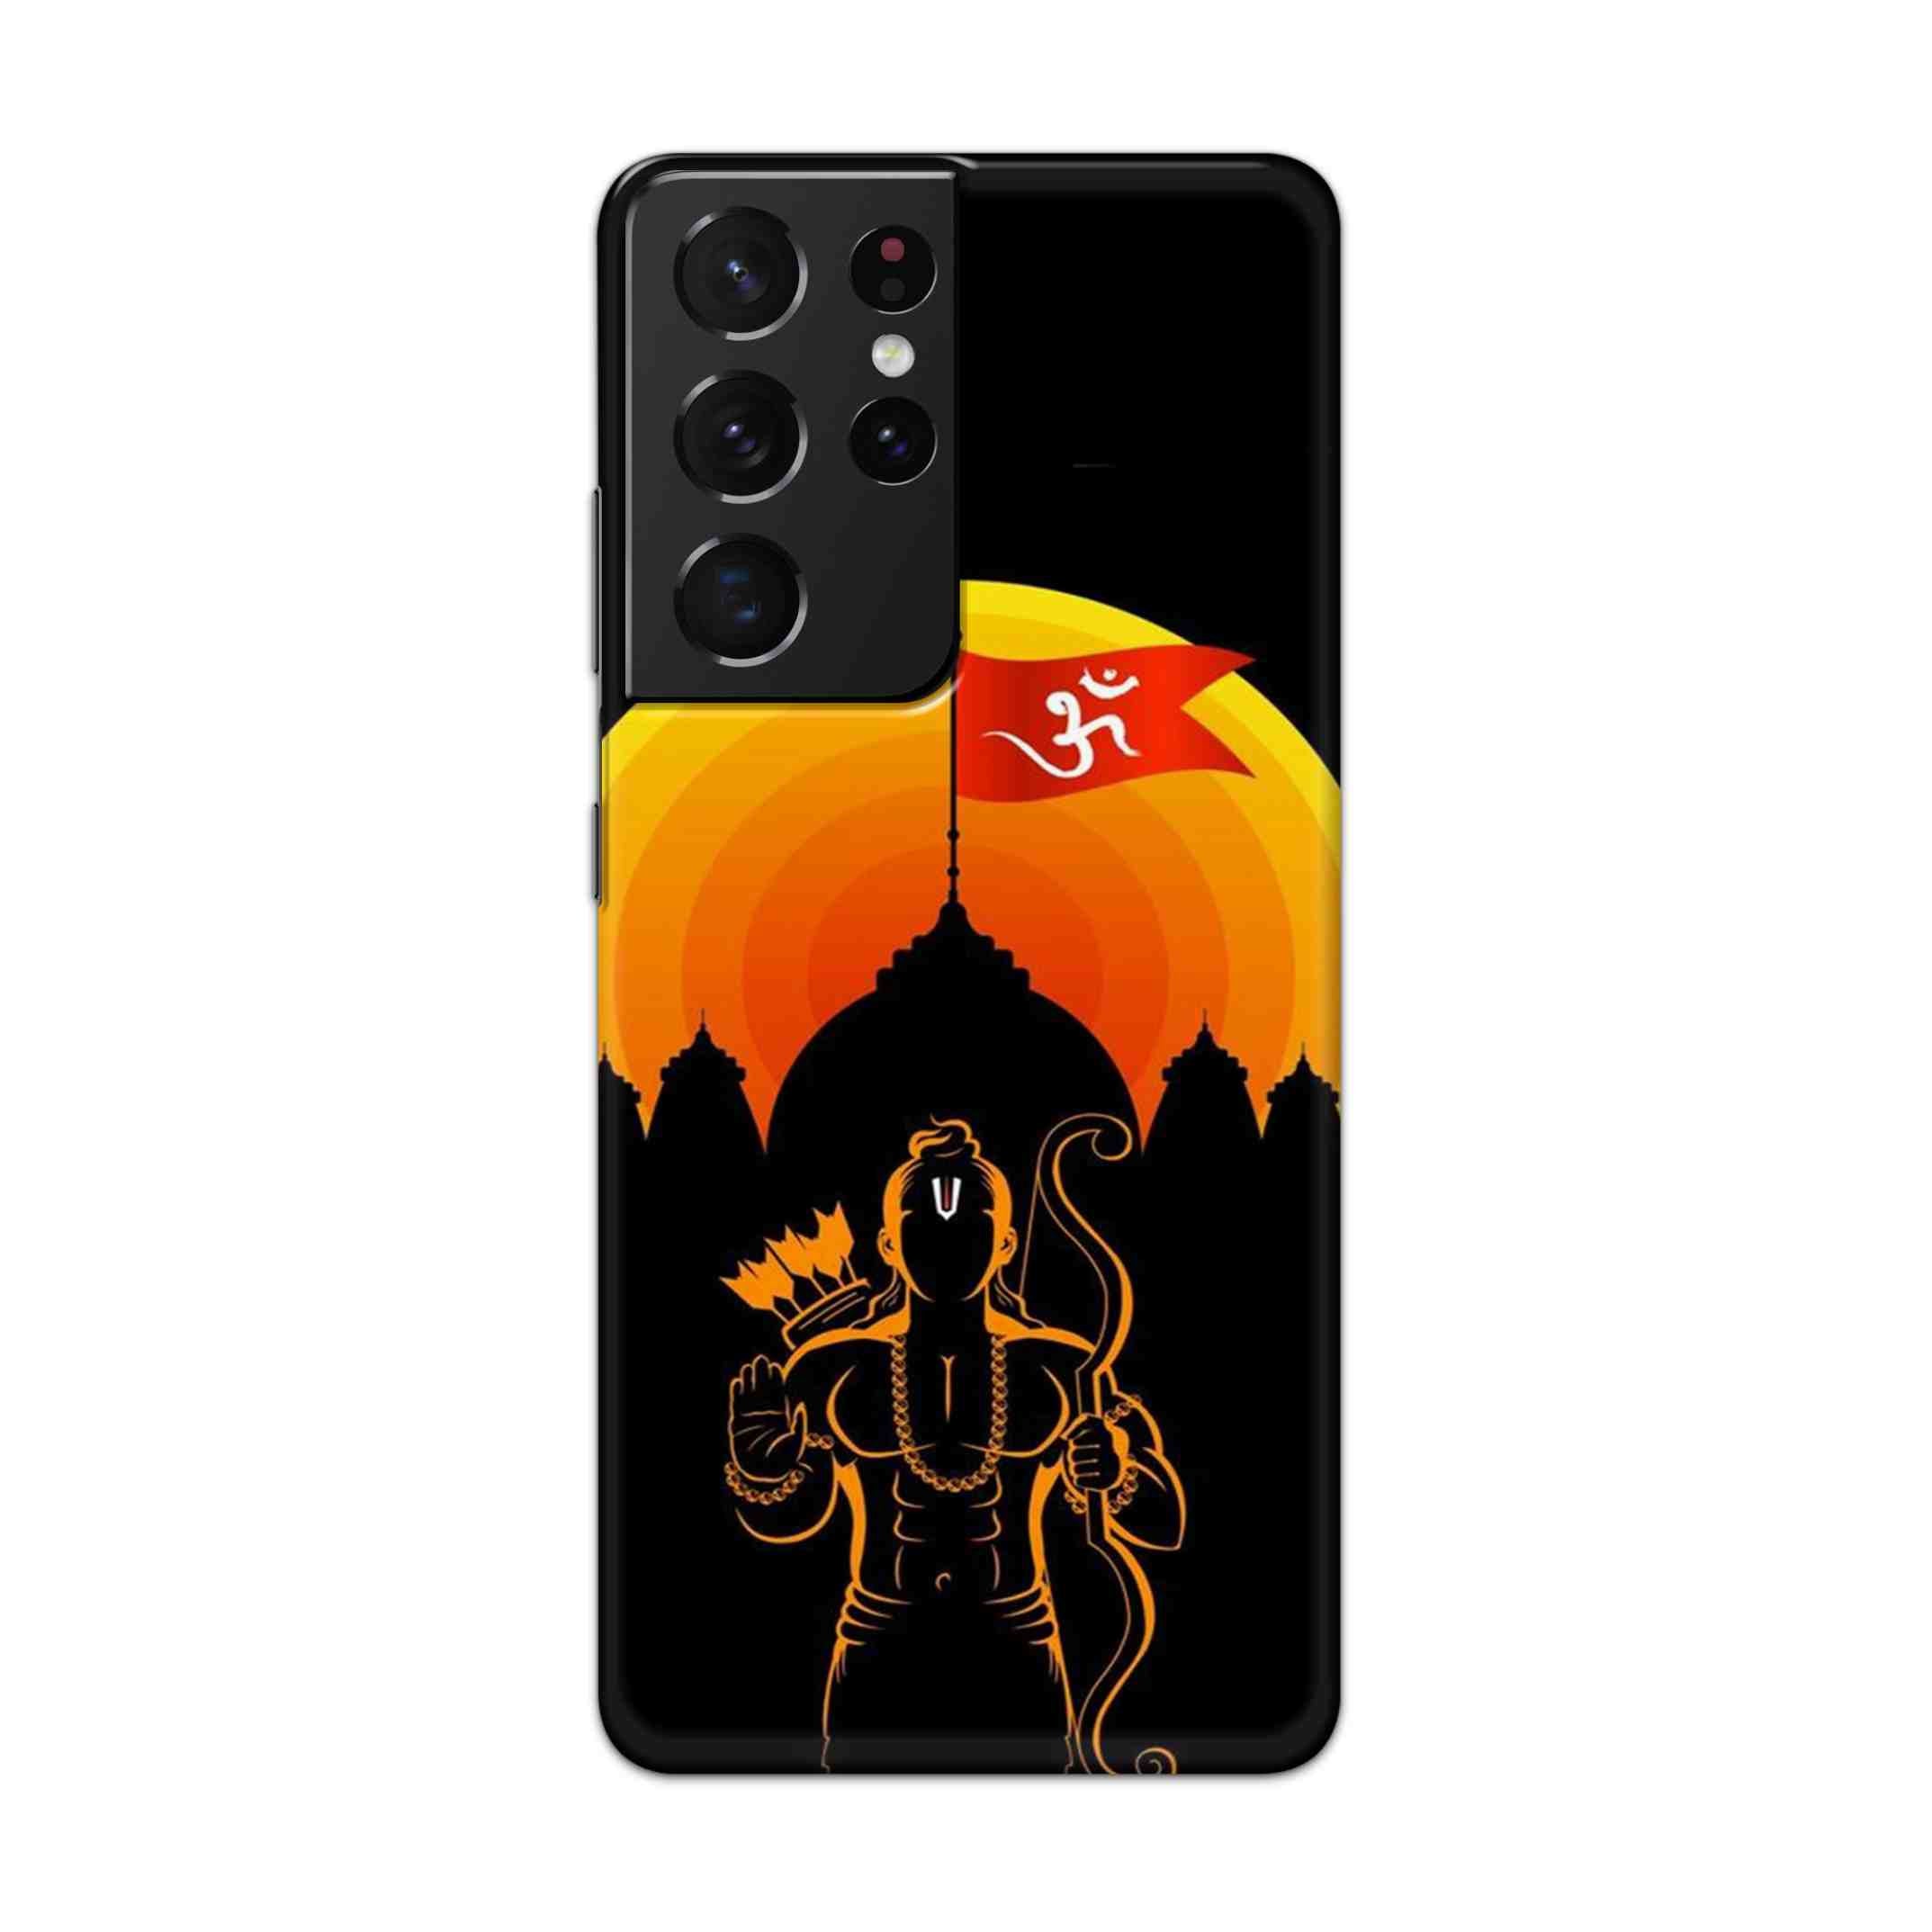 Buy Ram Ji Hard Back Mobile Phone Case Cover For Samsung Galaxy S21 Ultra Online